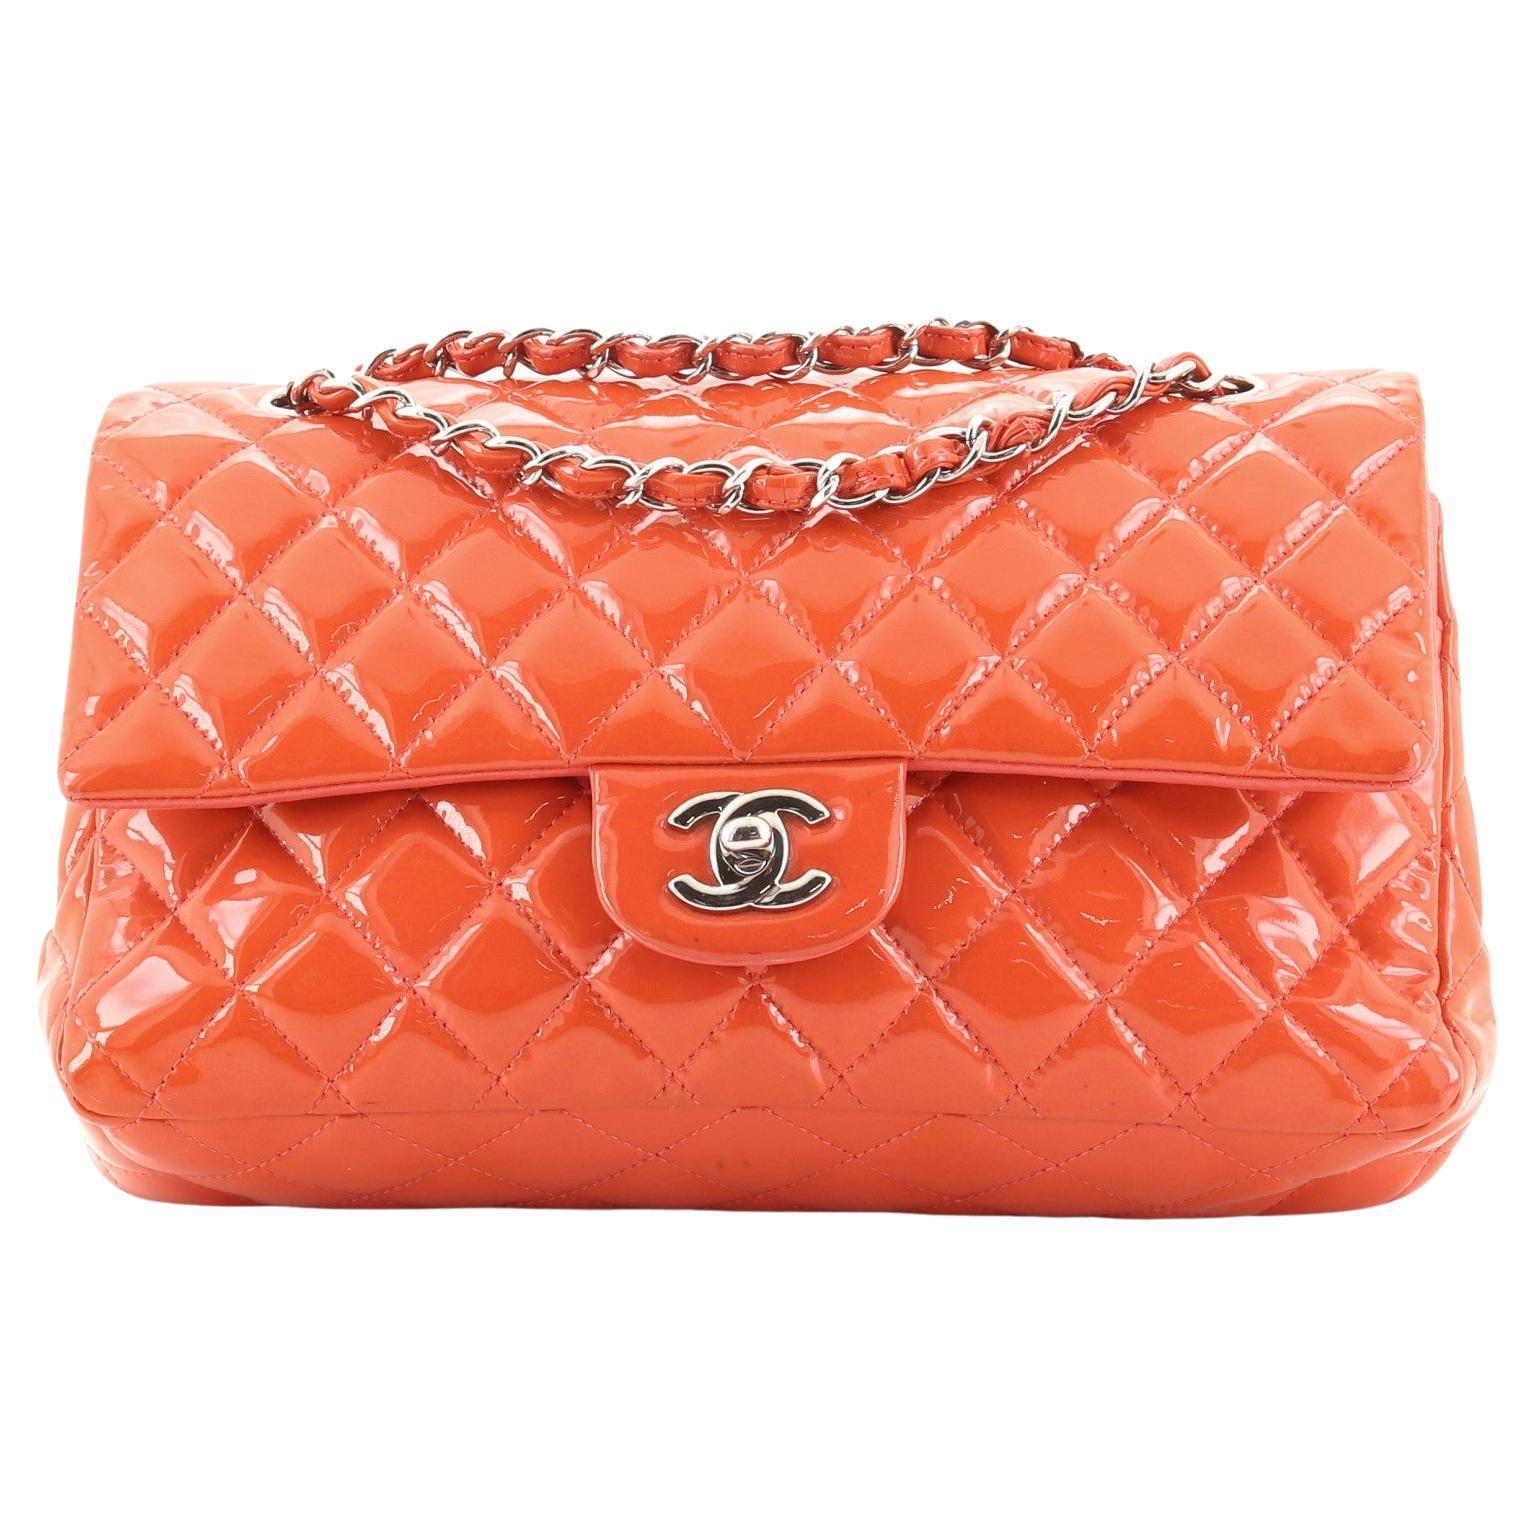 Chanel Classic Double Flap Bag Quilted Patent Medium